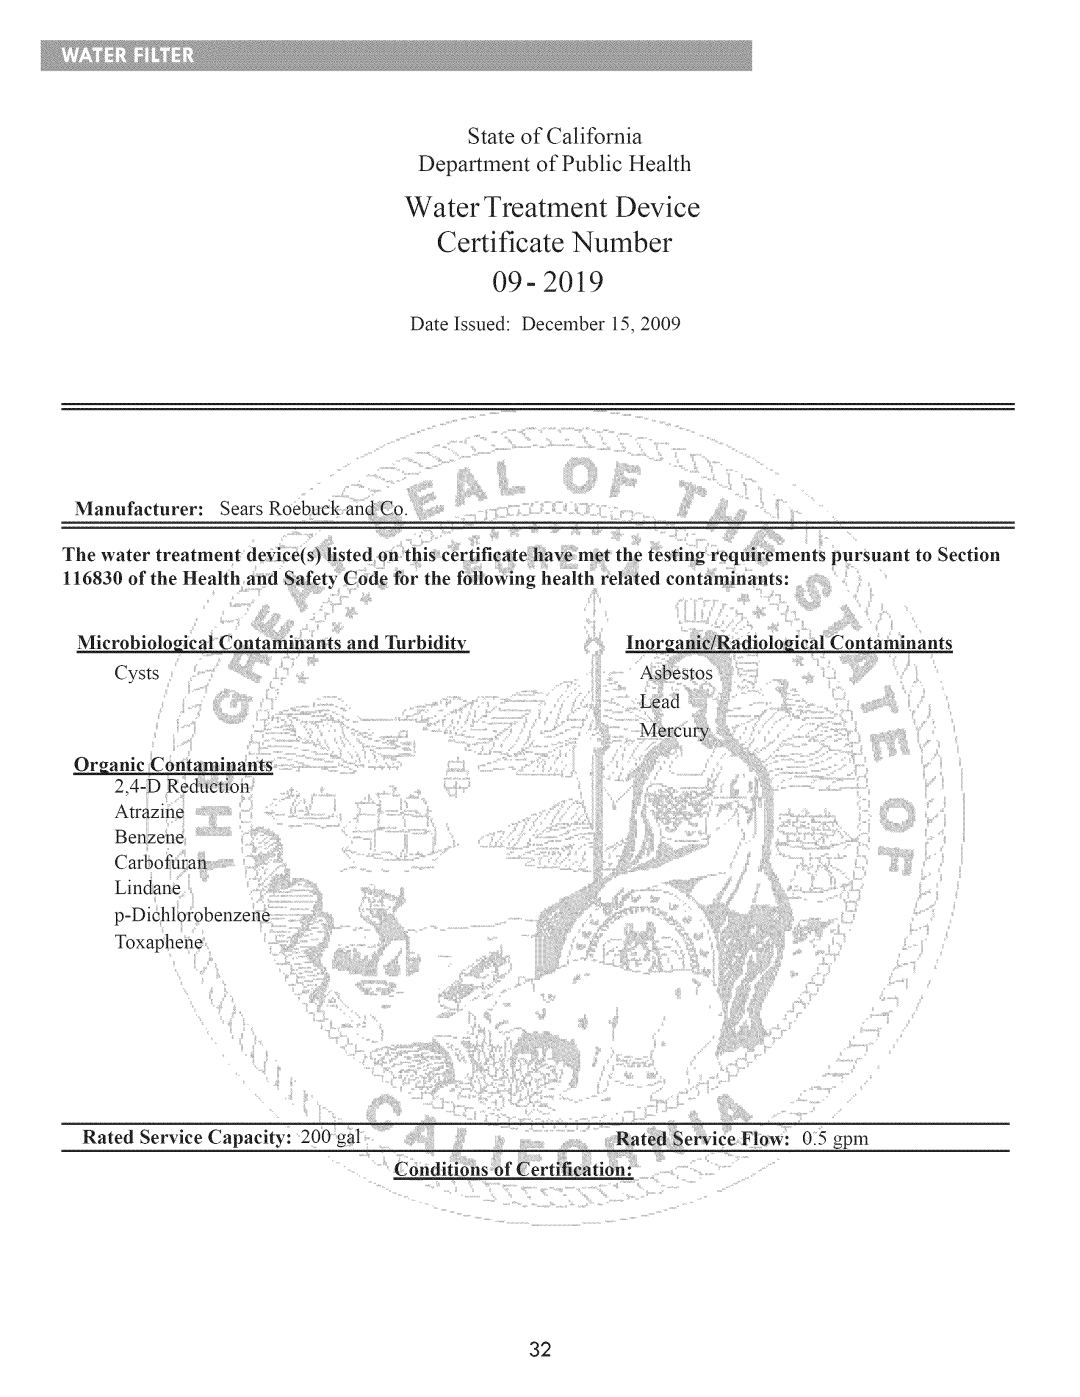 Kenmore 795.7205 Water Treatment Device Certificate Number, State of California Department of Public Health, Toxaphene 